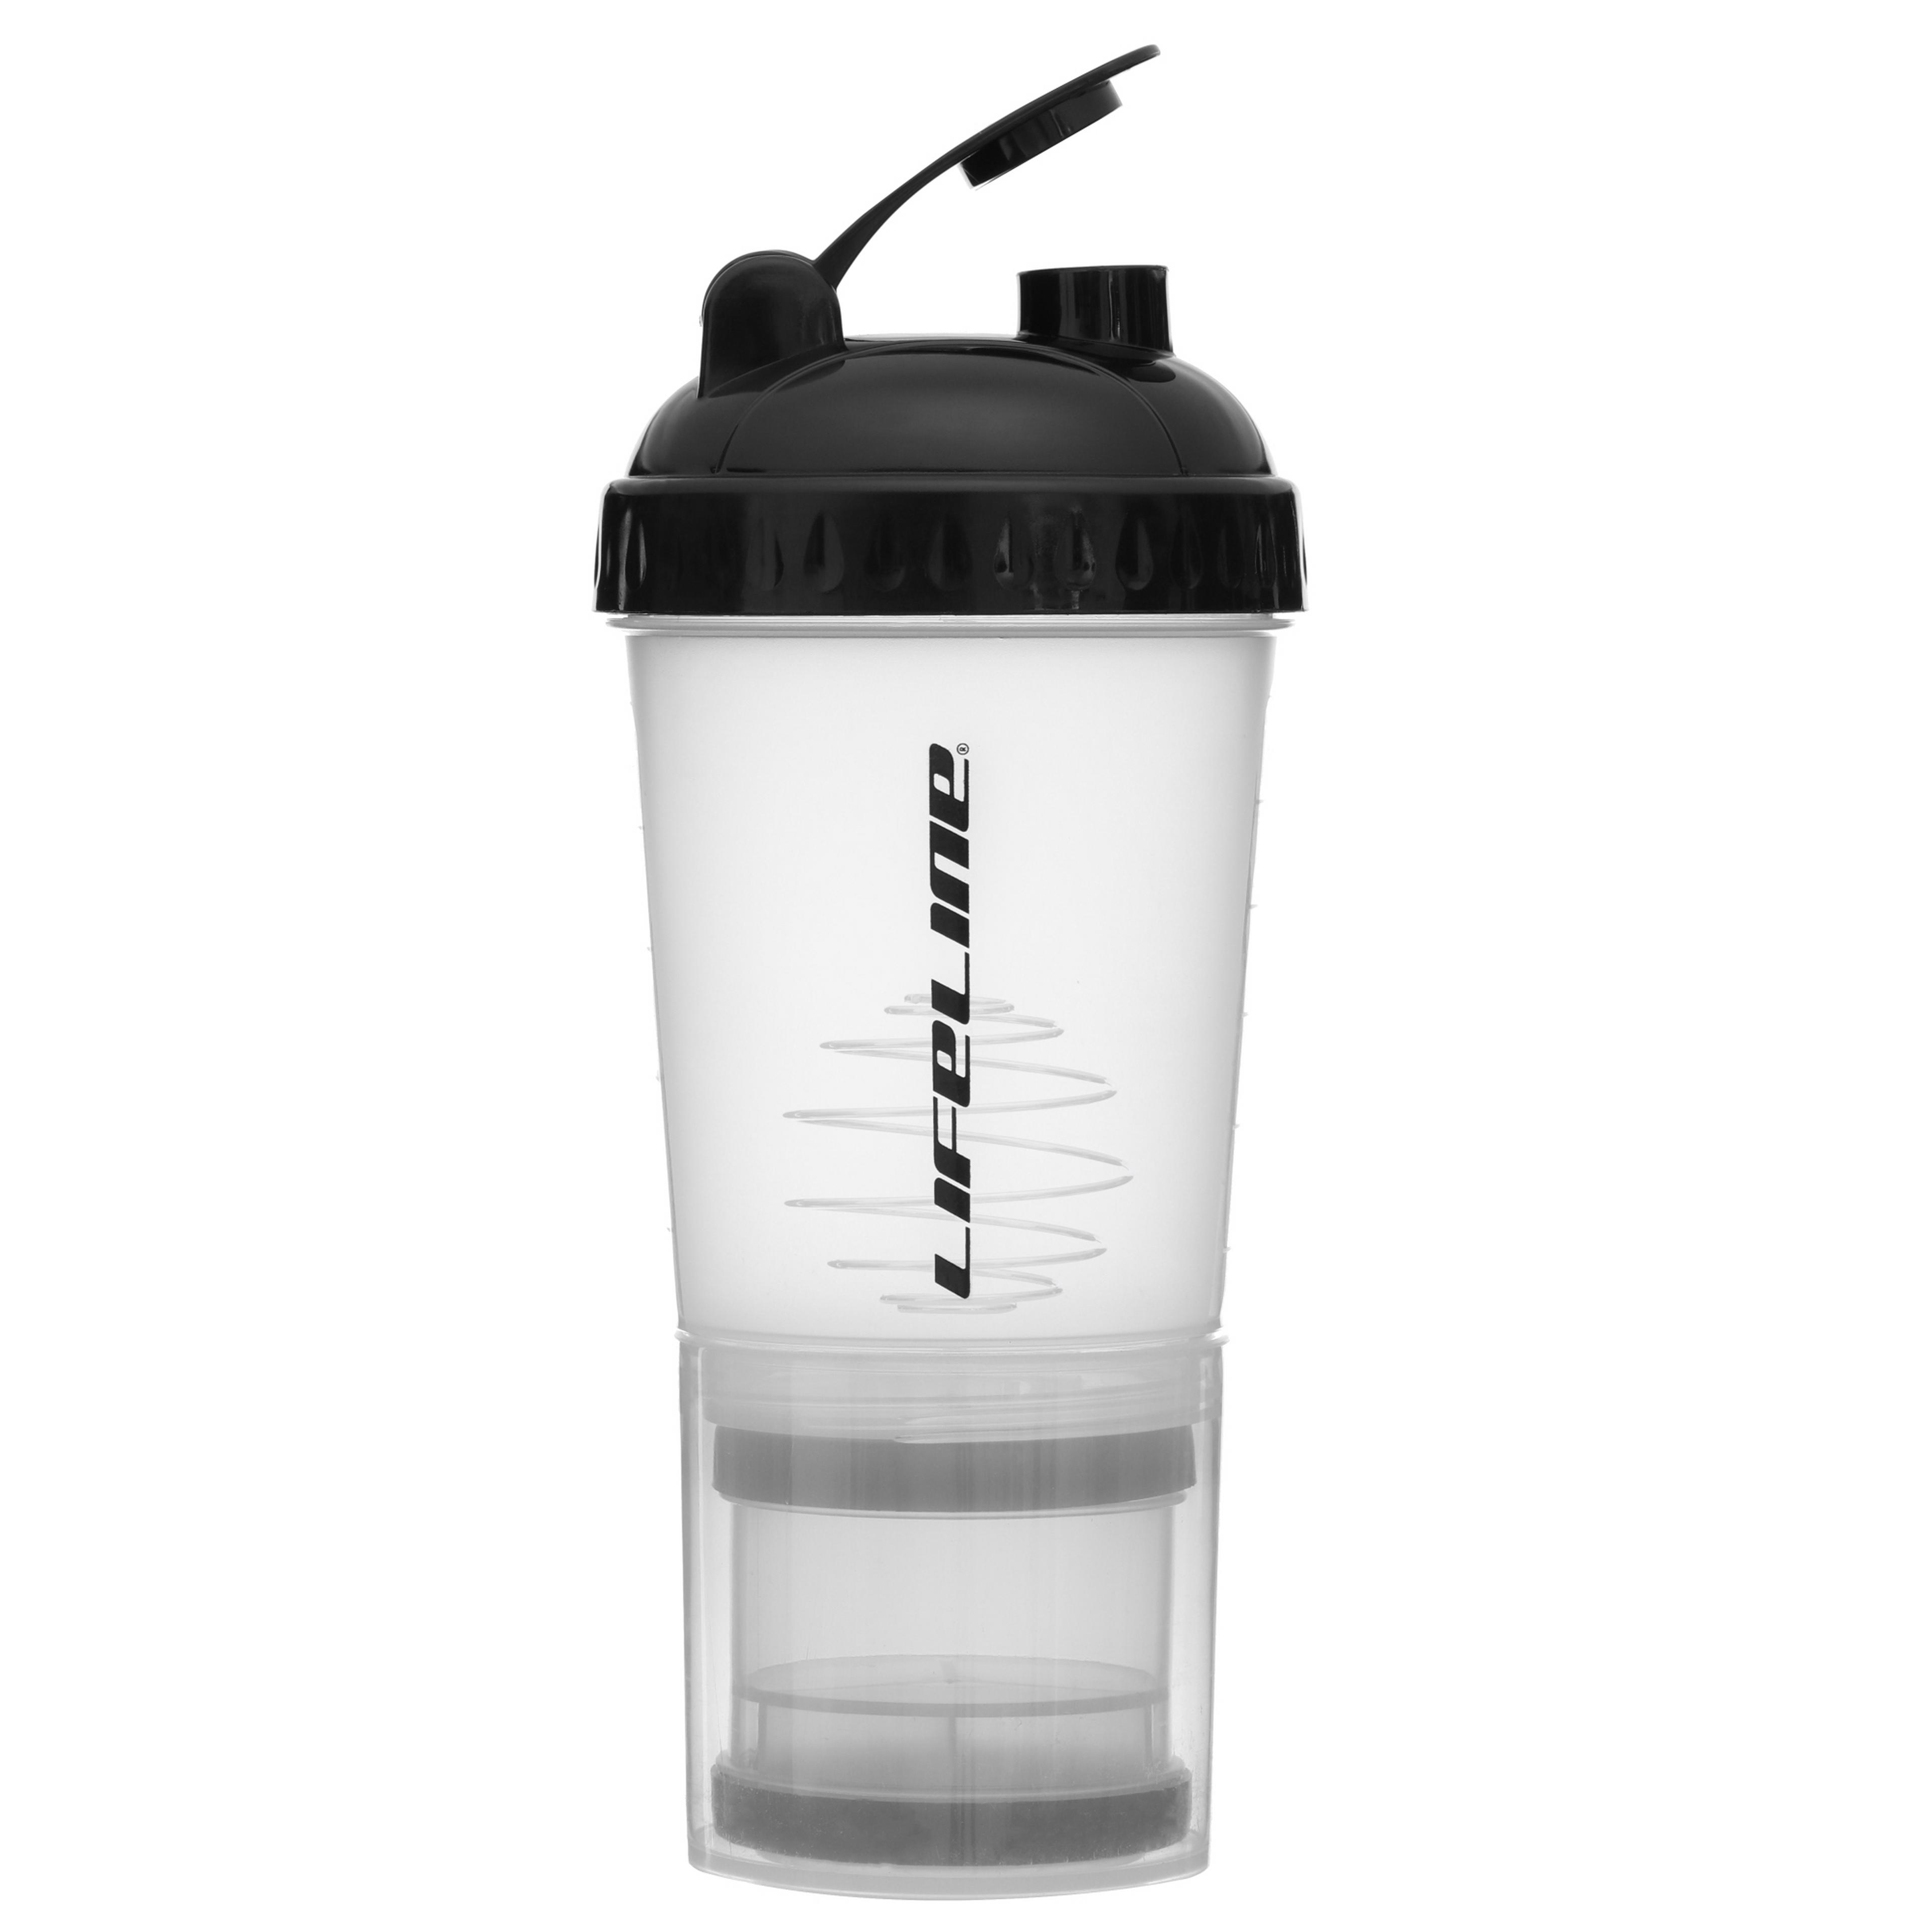 Promotional 34 Oz. Muscle Coffee Mug With Spill-Resistant Lid